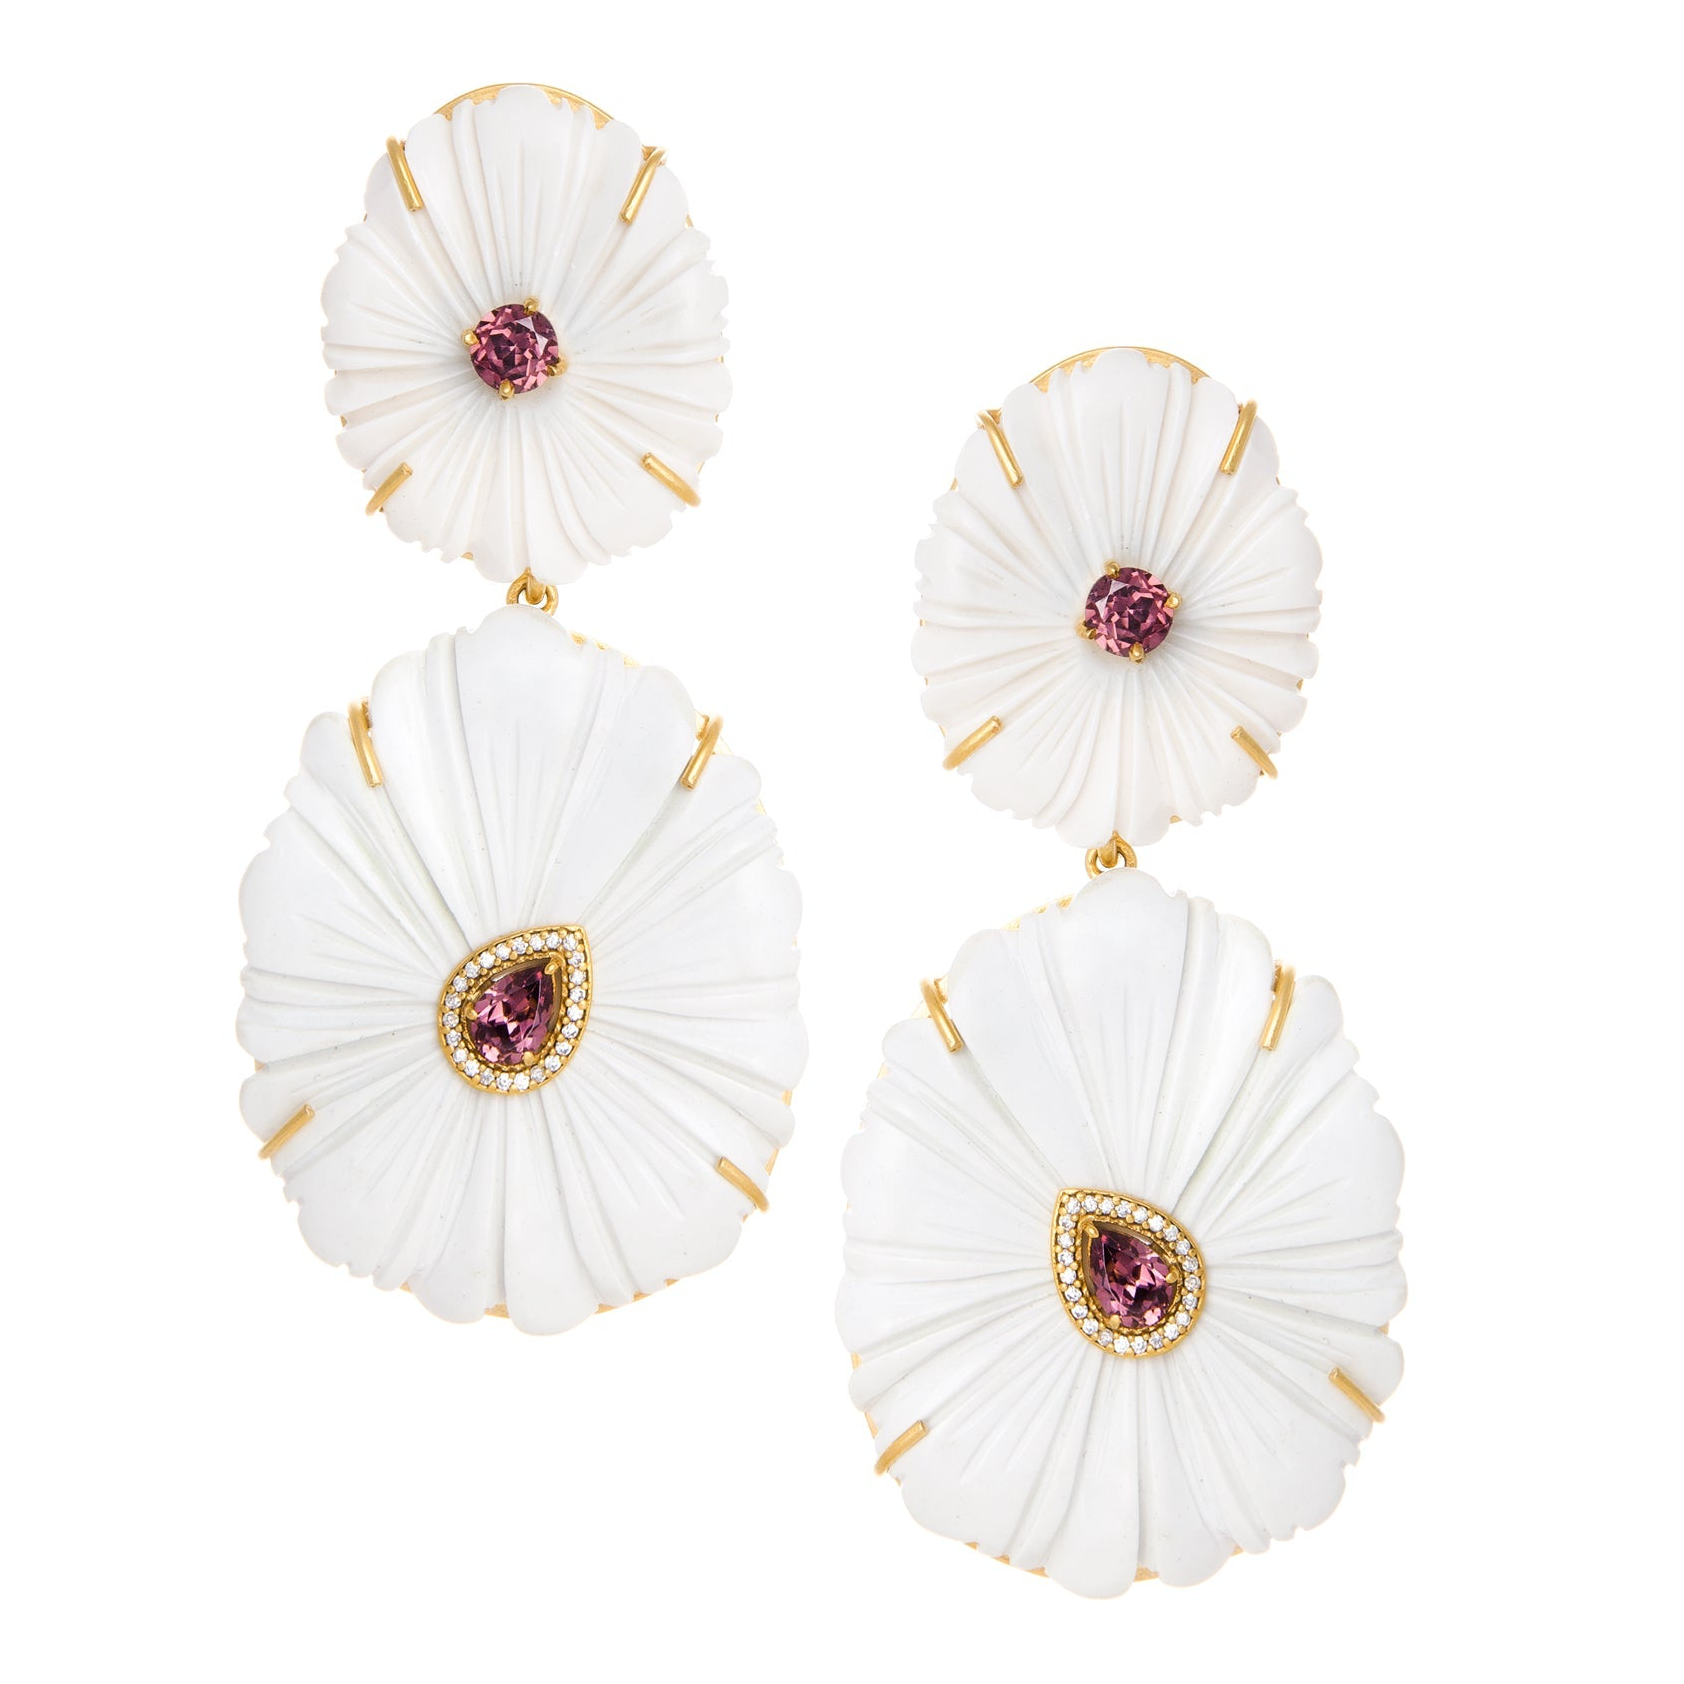 Carved White Agate and Garnet Flower Statement Earrings: The Emilia